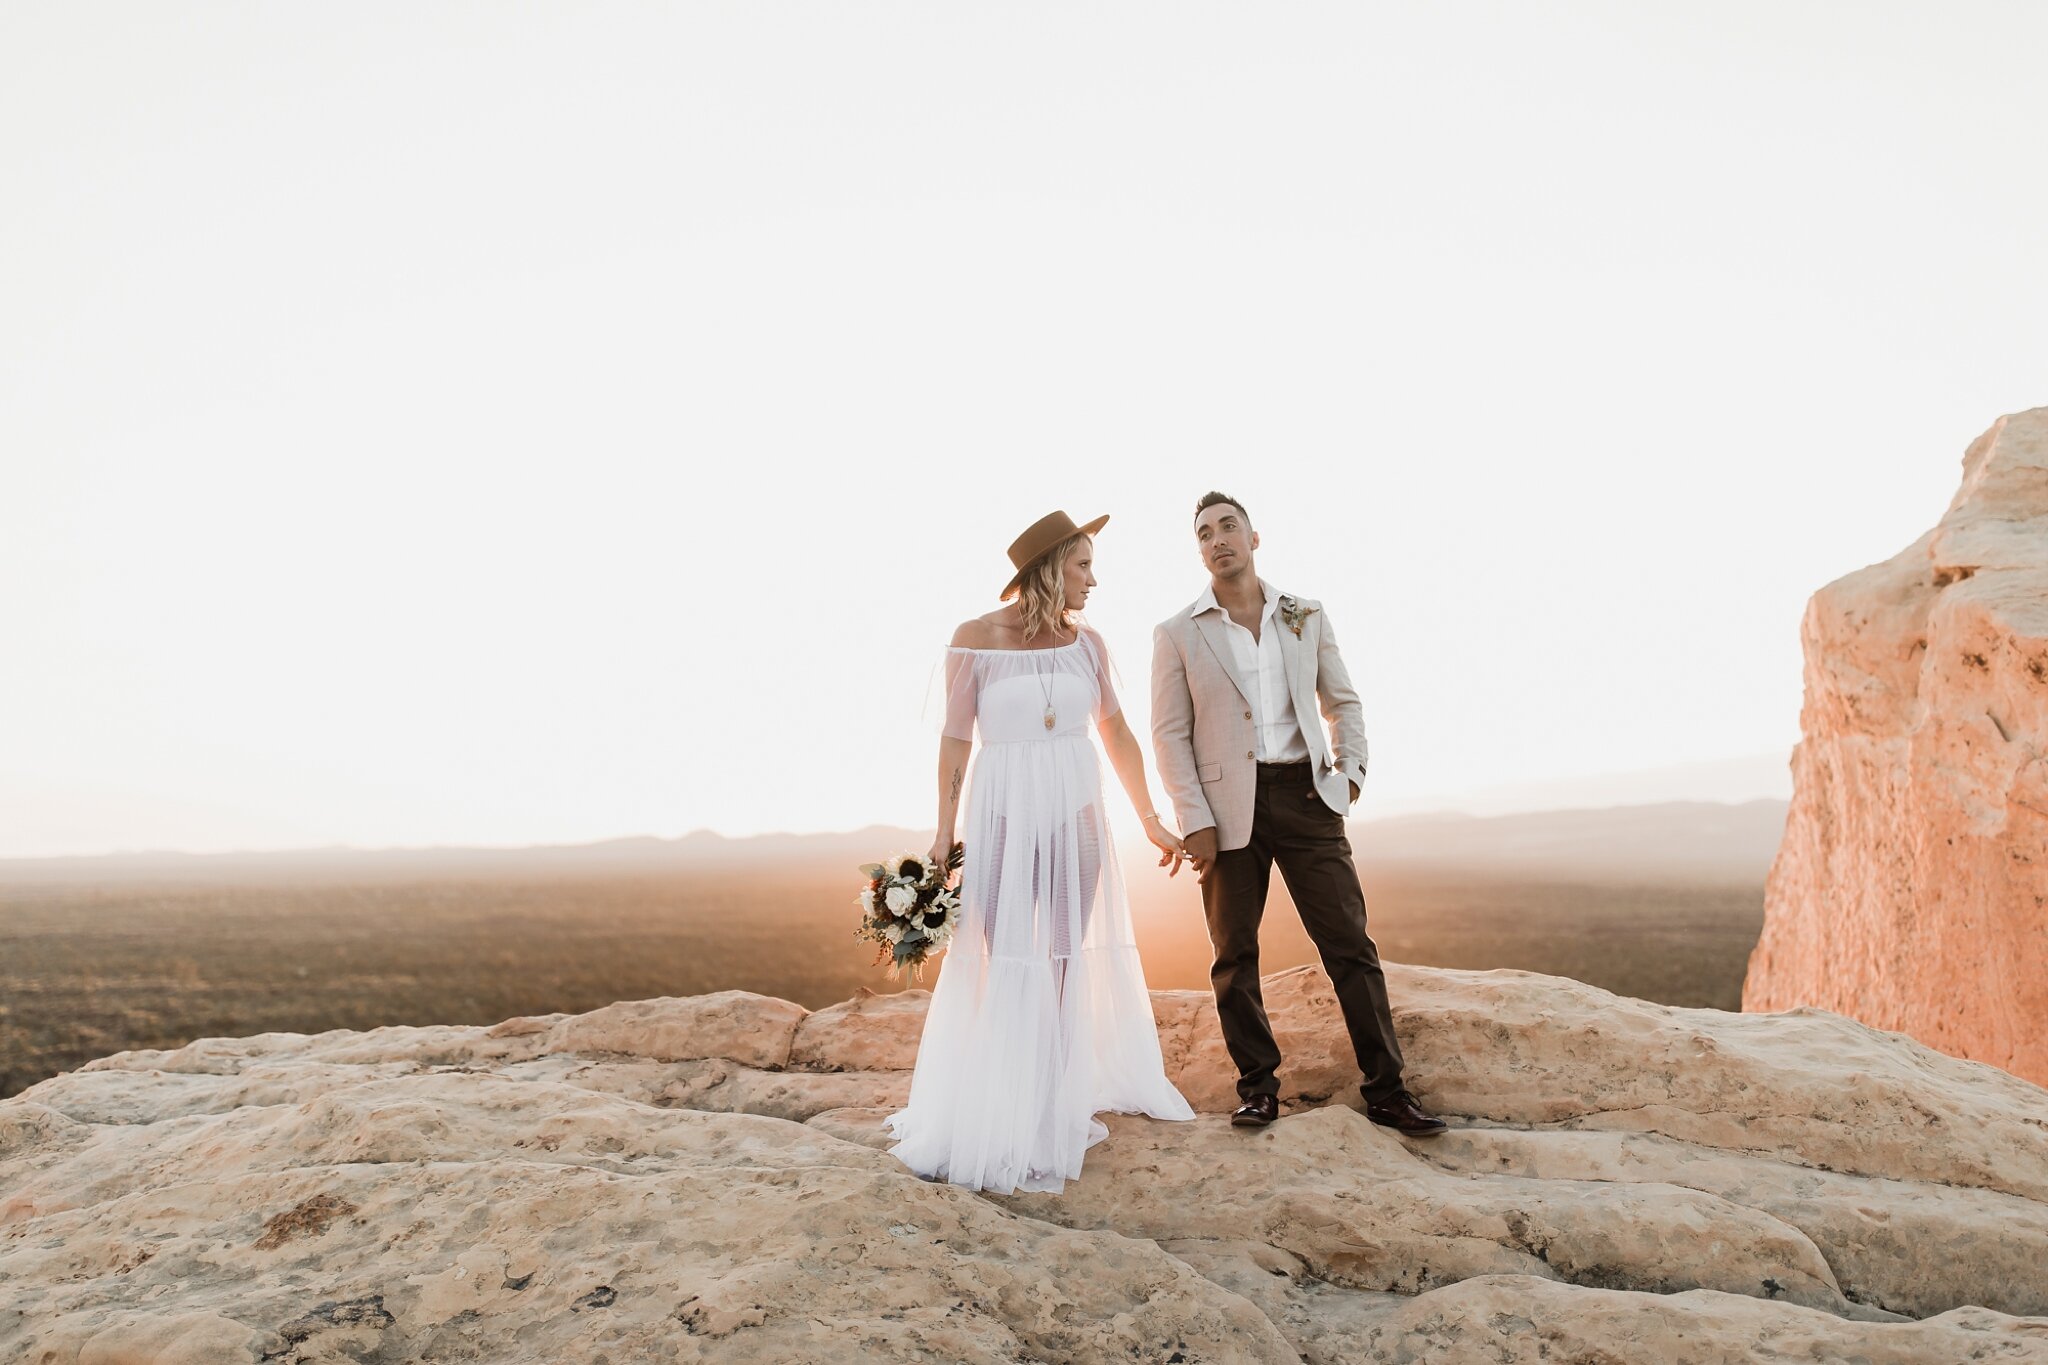 Alicia+lucia+photography+-+albuquerque+wedding+photographer+-+santa+fe+wedding+photography+-+new+mexico+wedding+photographer+-+new+mexico+wedding+-+anniversary+-+styled+anniversary+-+elopement+-+styled+elopement_0036.jpg